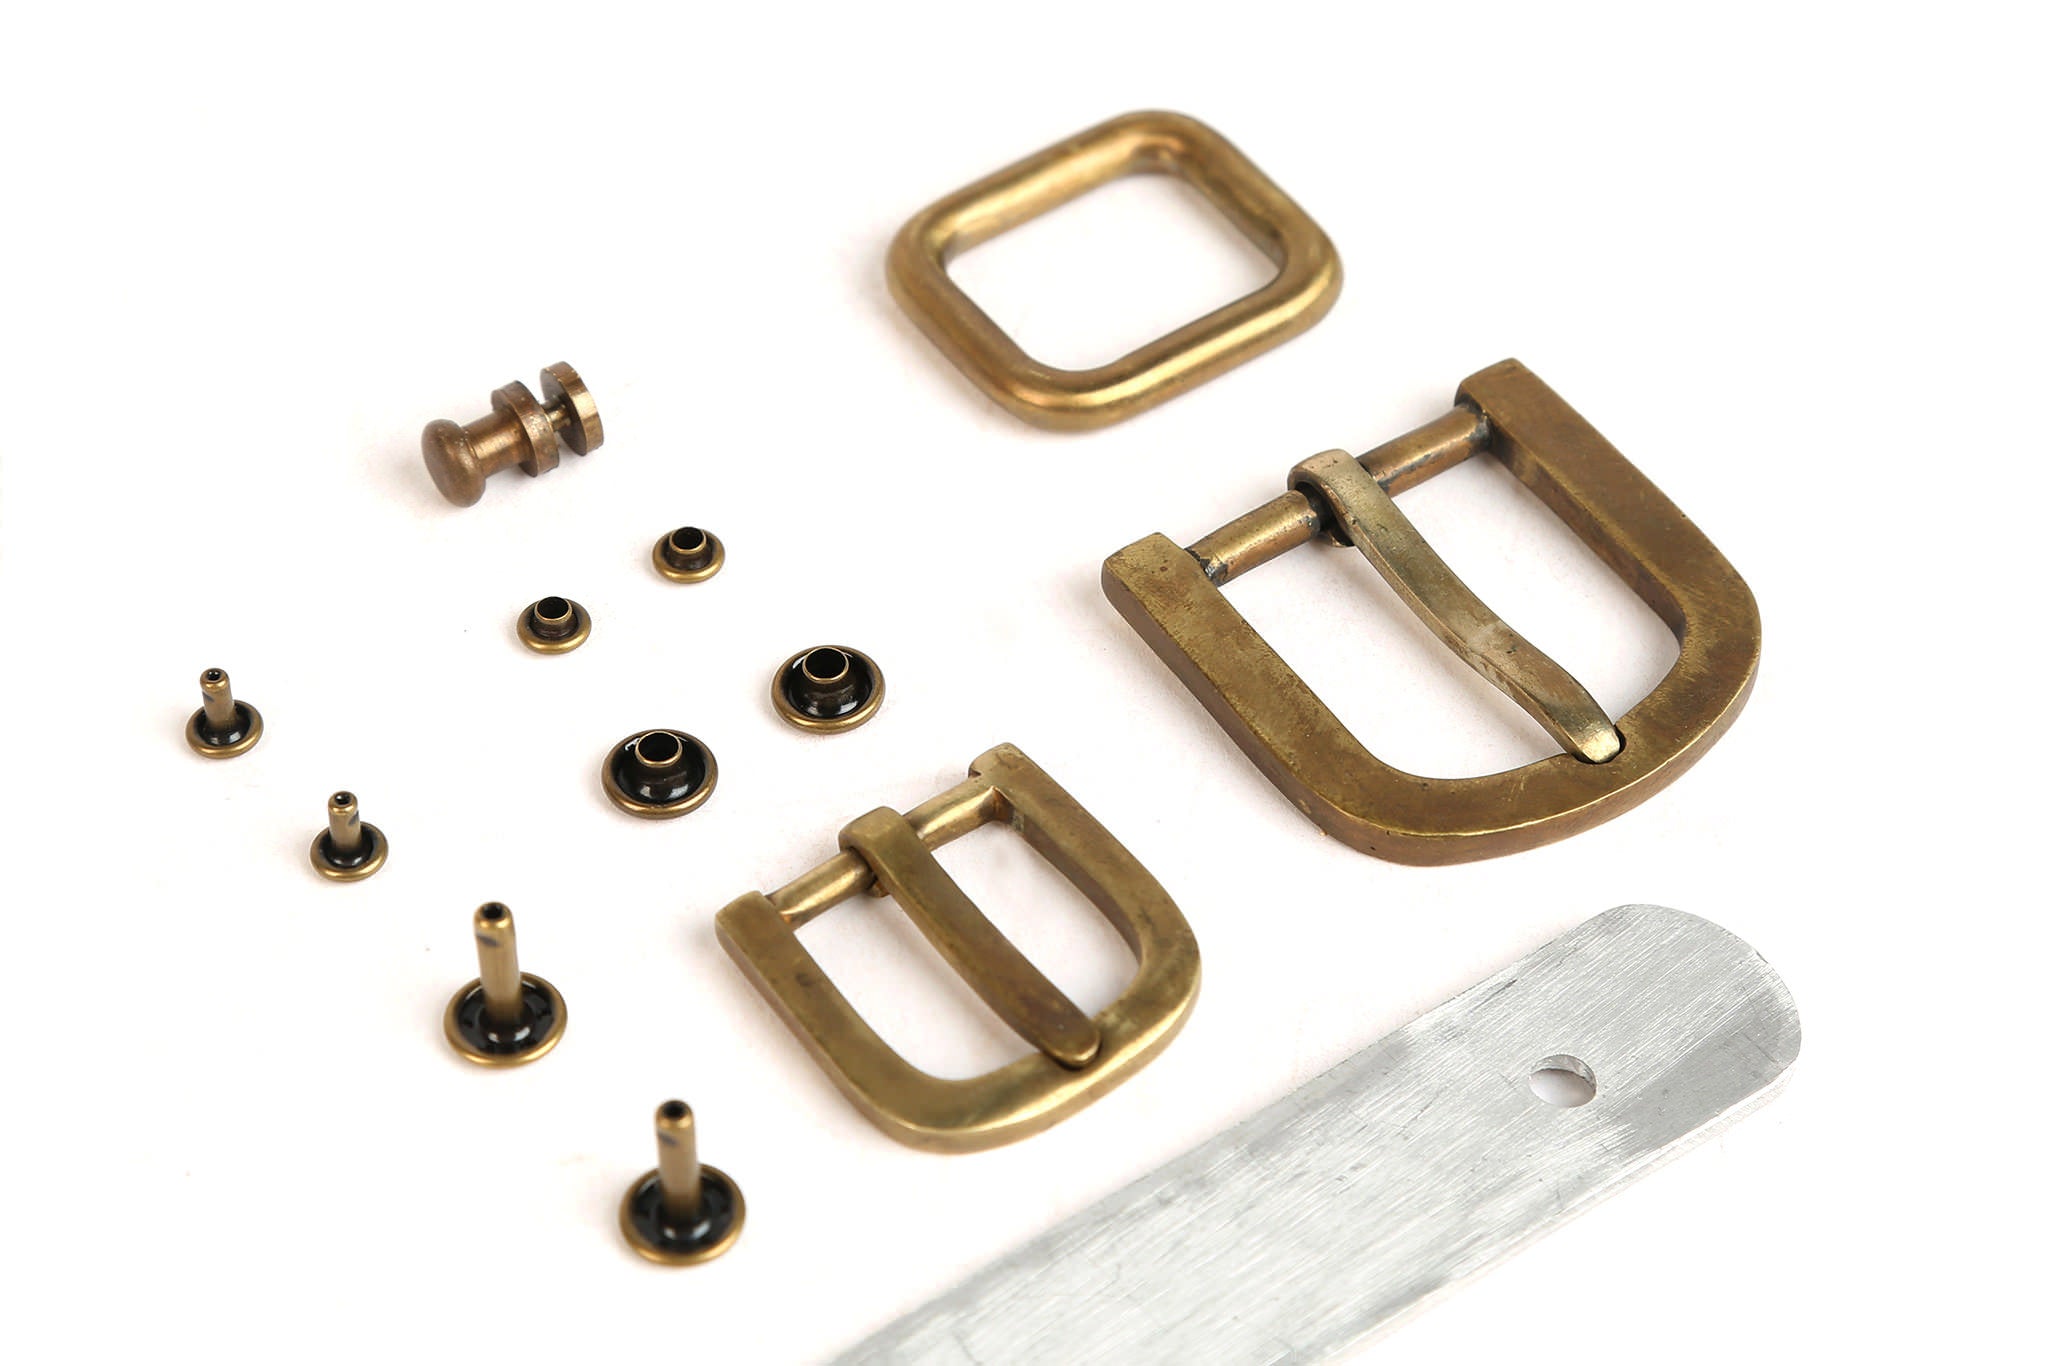 Solid brass and aluminum accessories with no moving parts,  nothing to break.